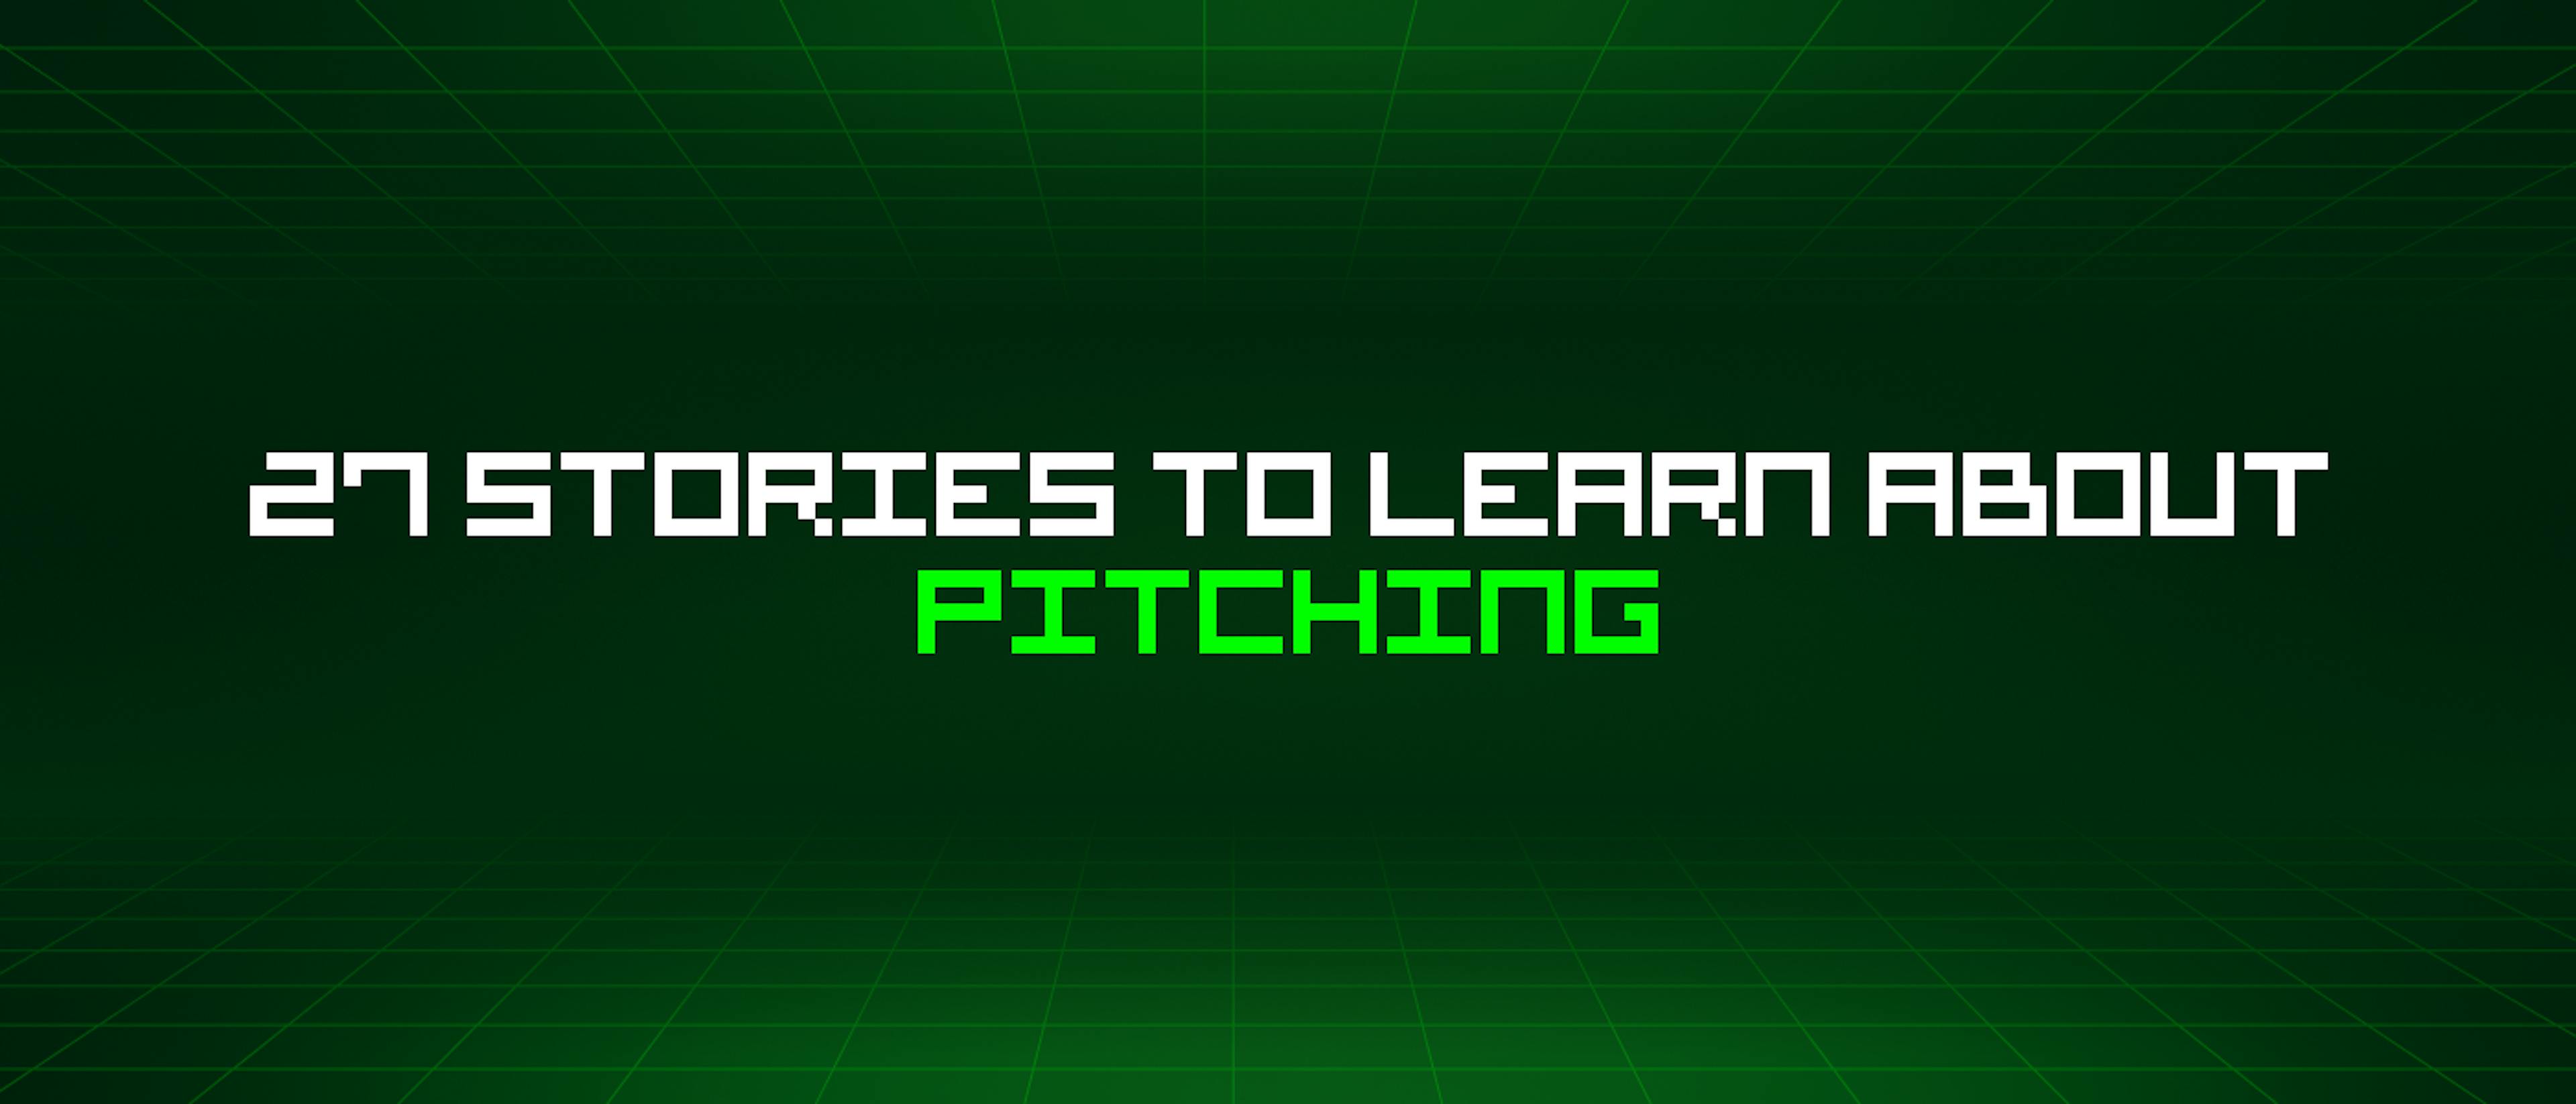 featured image - 27 Stories To Learn About Pitching